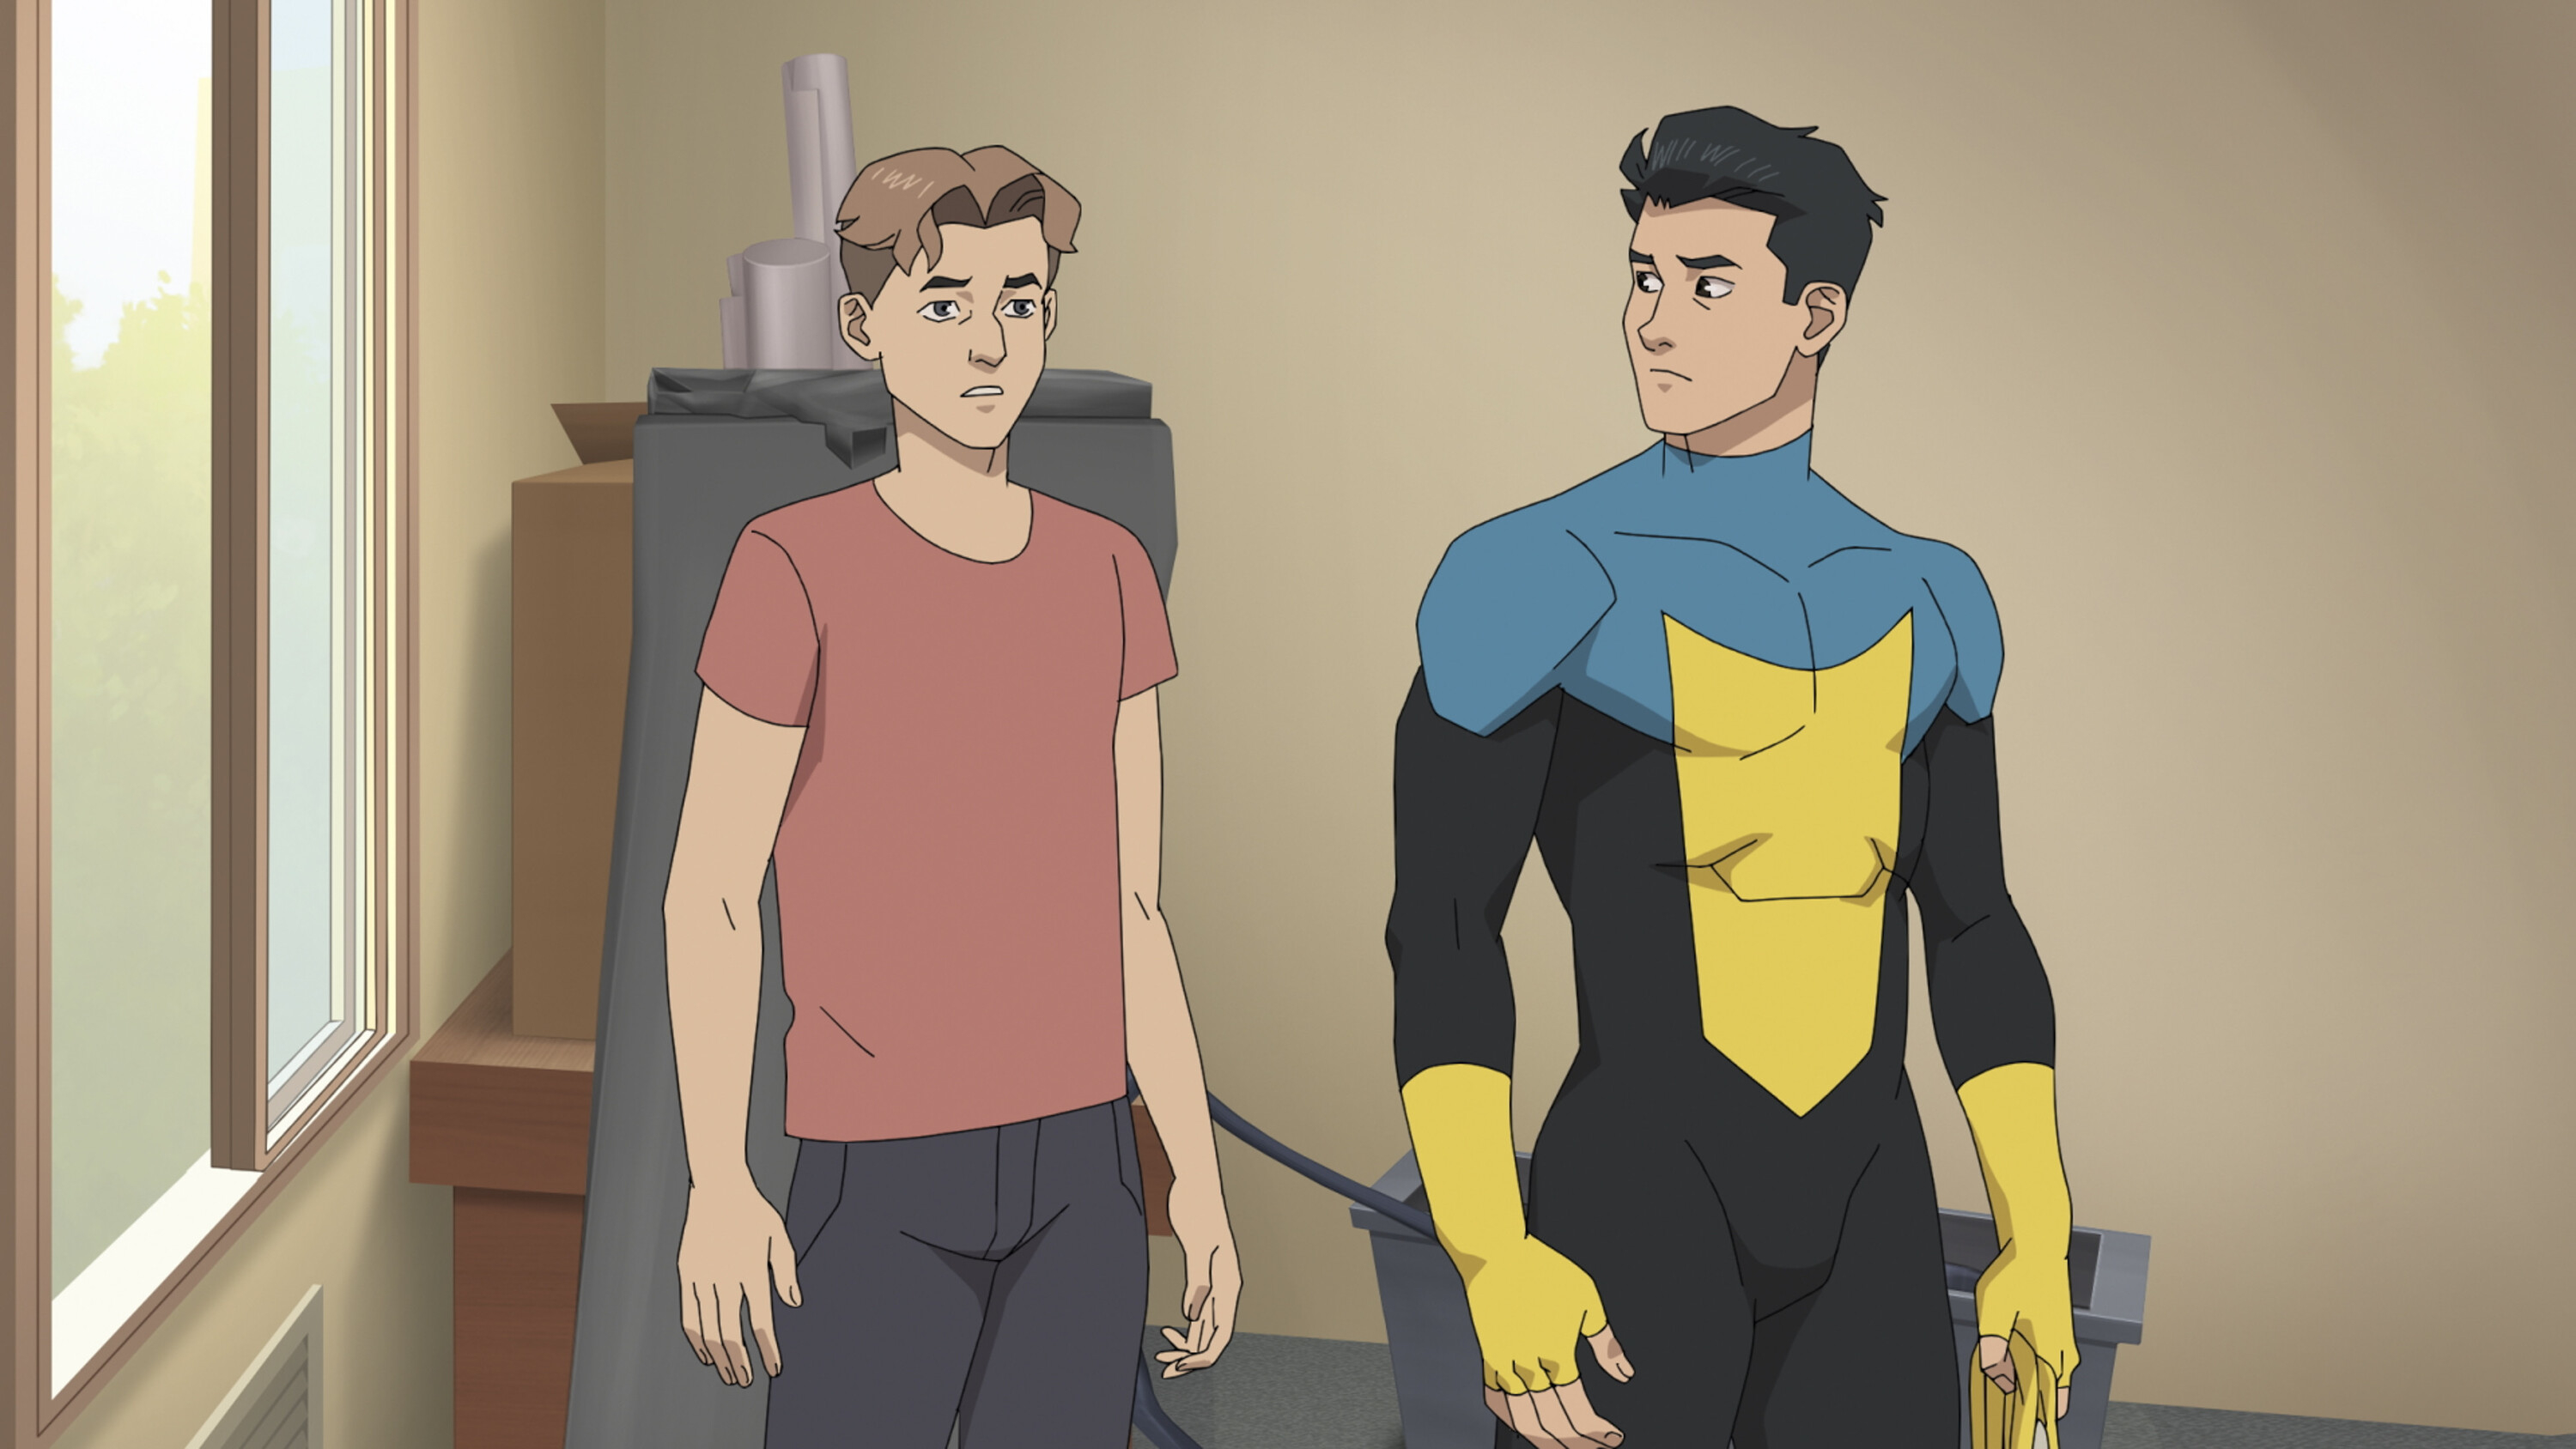 Mark Grayson and his superhero father, Nolan, from the animated series Invincible, standing in a room